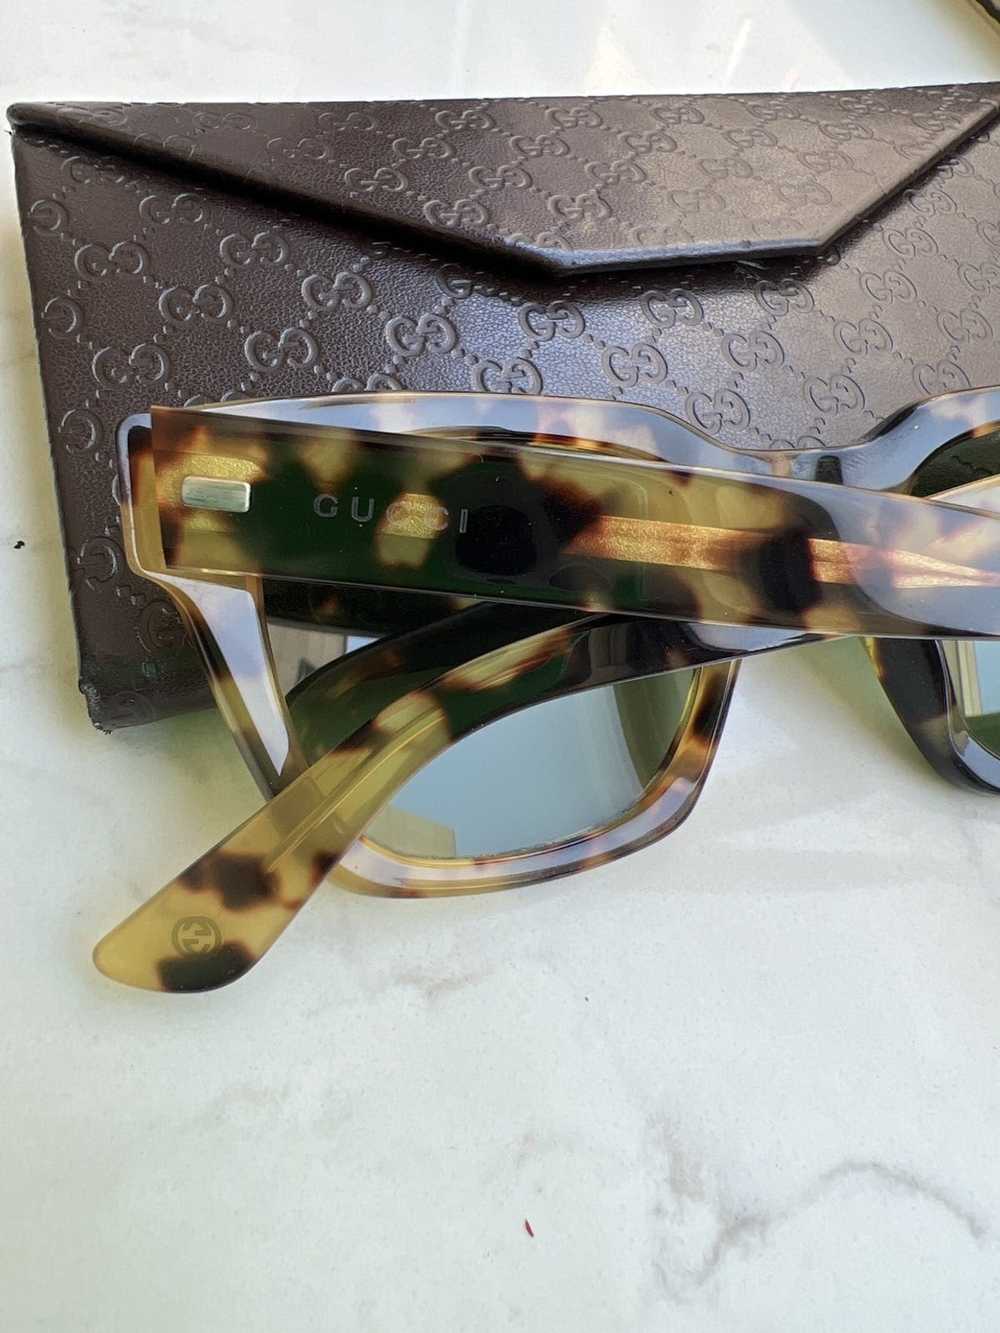 Gucci Limited edition sunglasses by Gucci - image 3